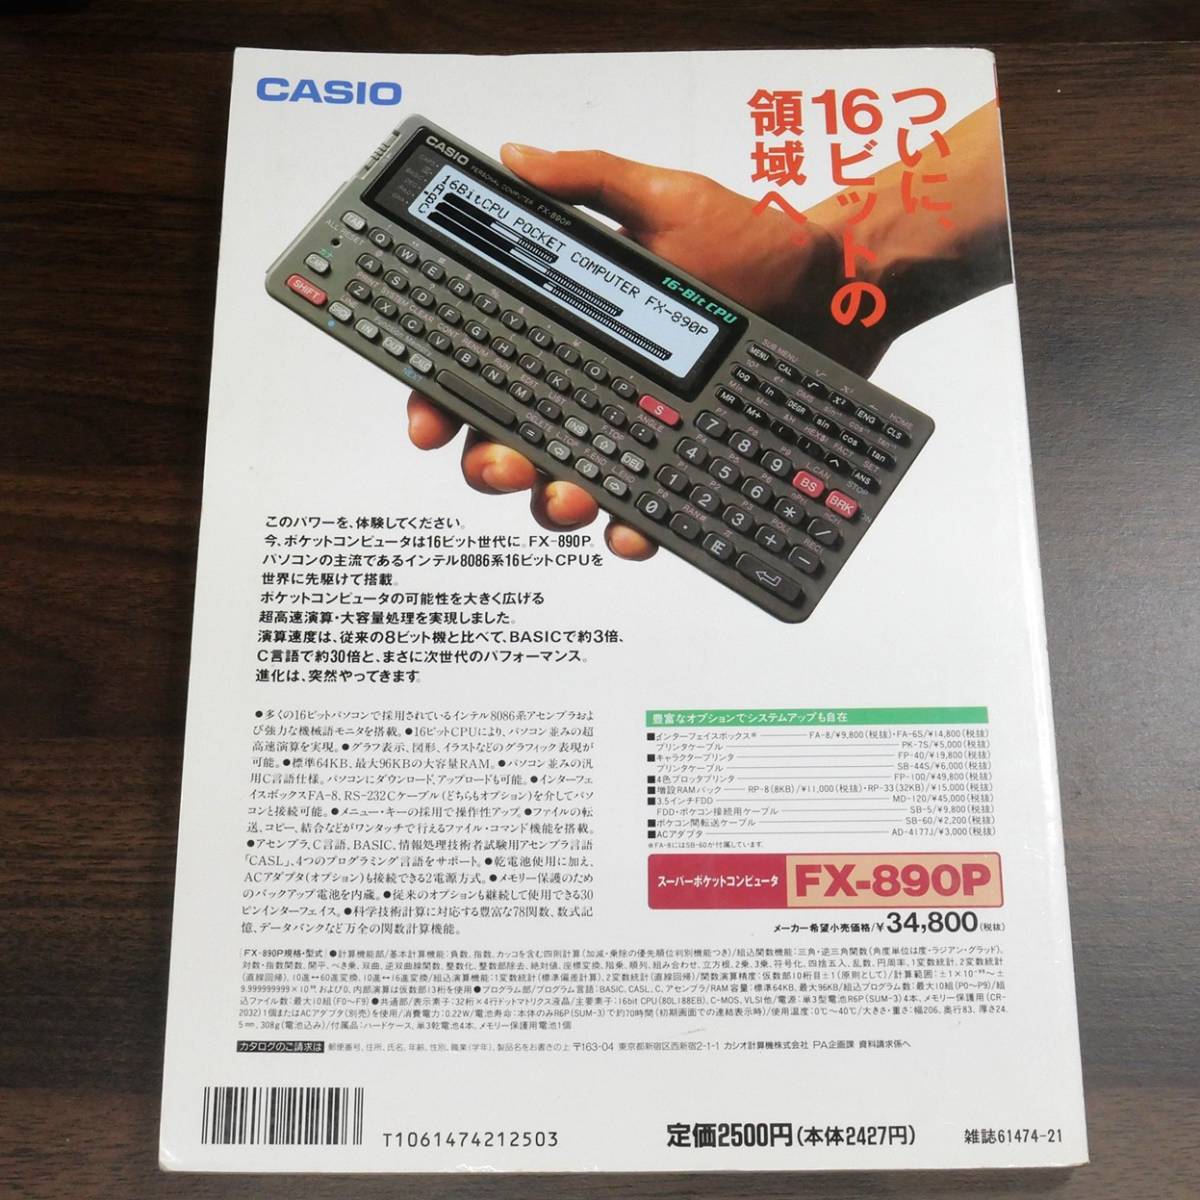 Z-1 / FX-890P practical use research (CASIO pocket computer I/O separate volume manual )